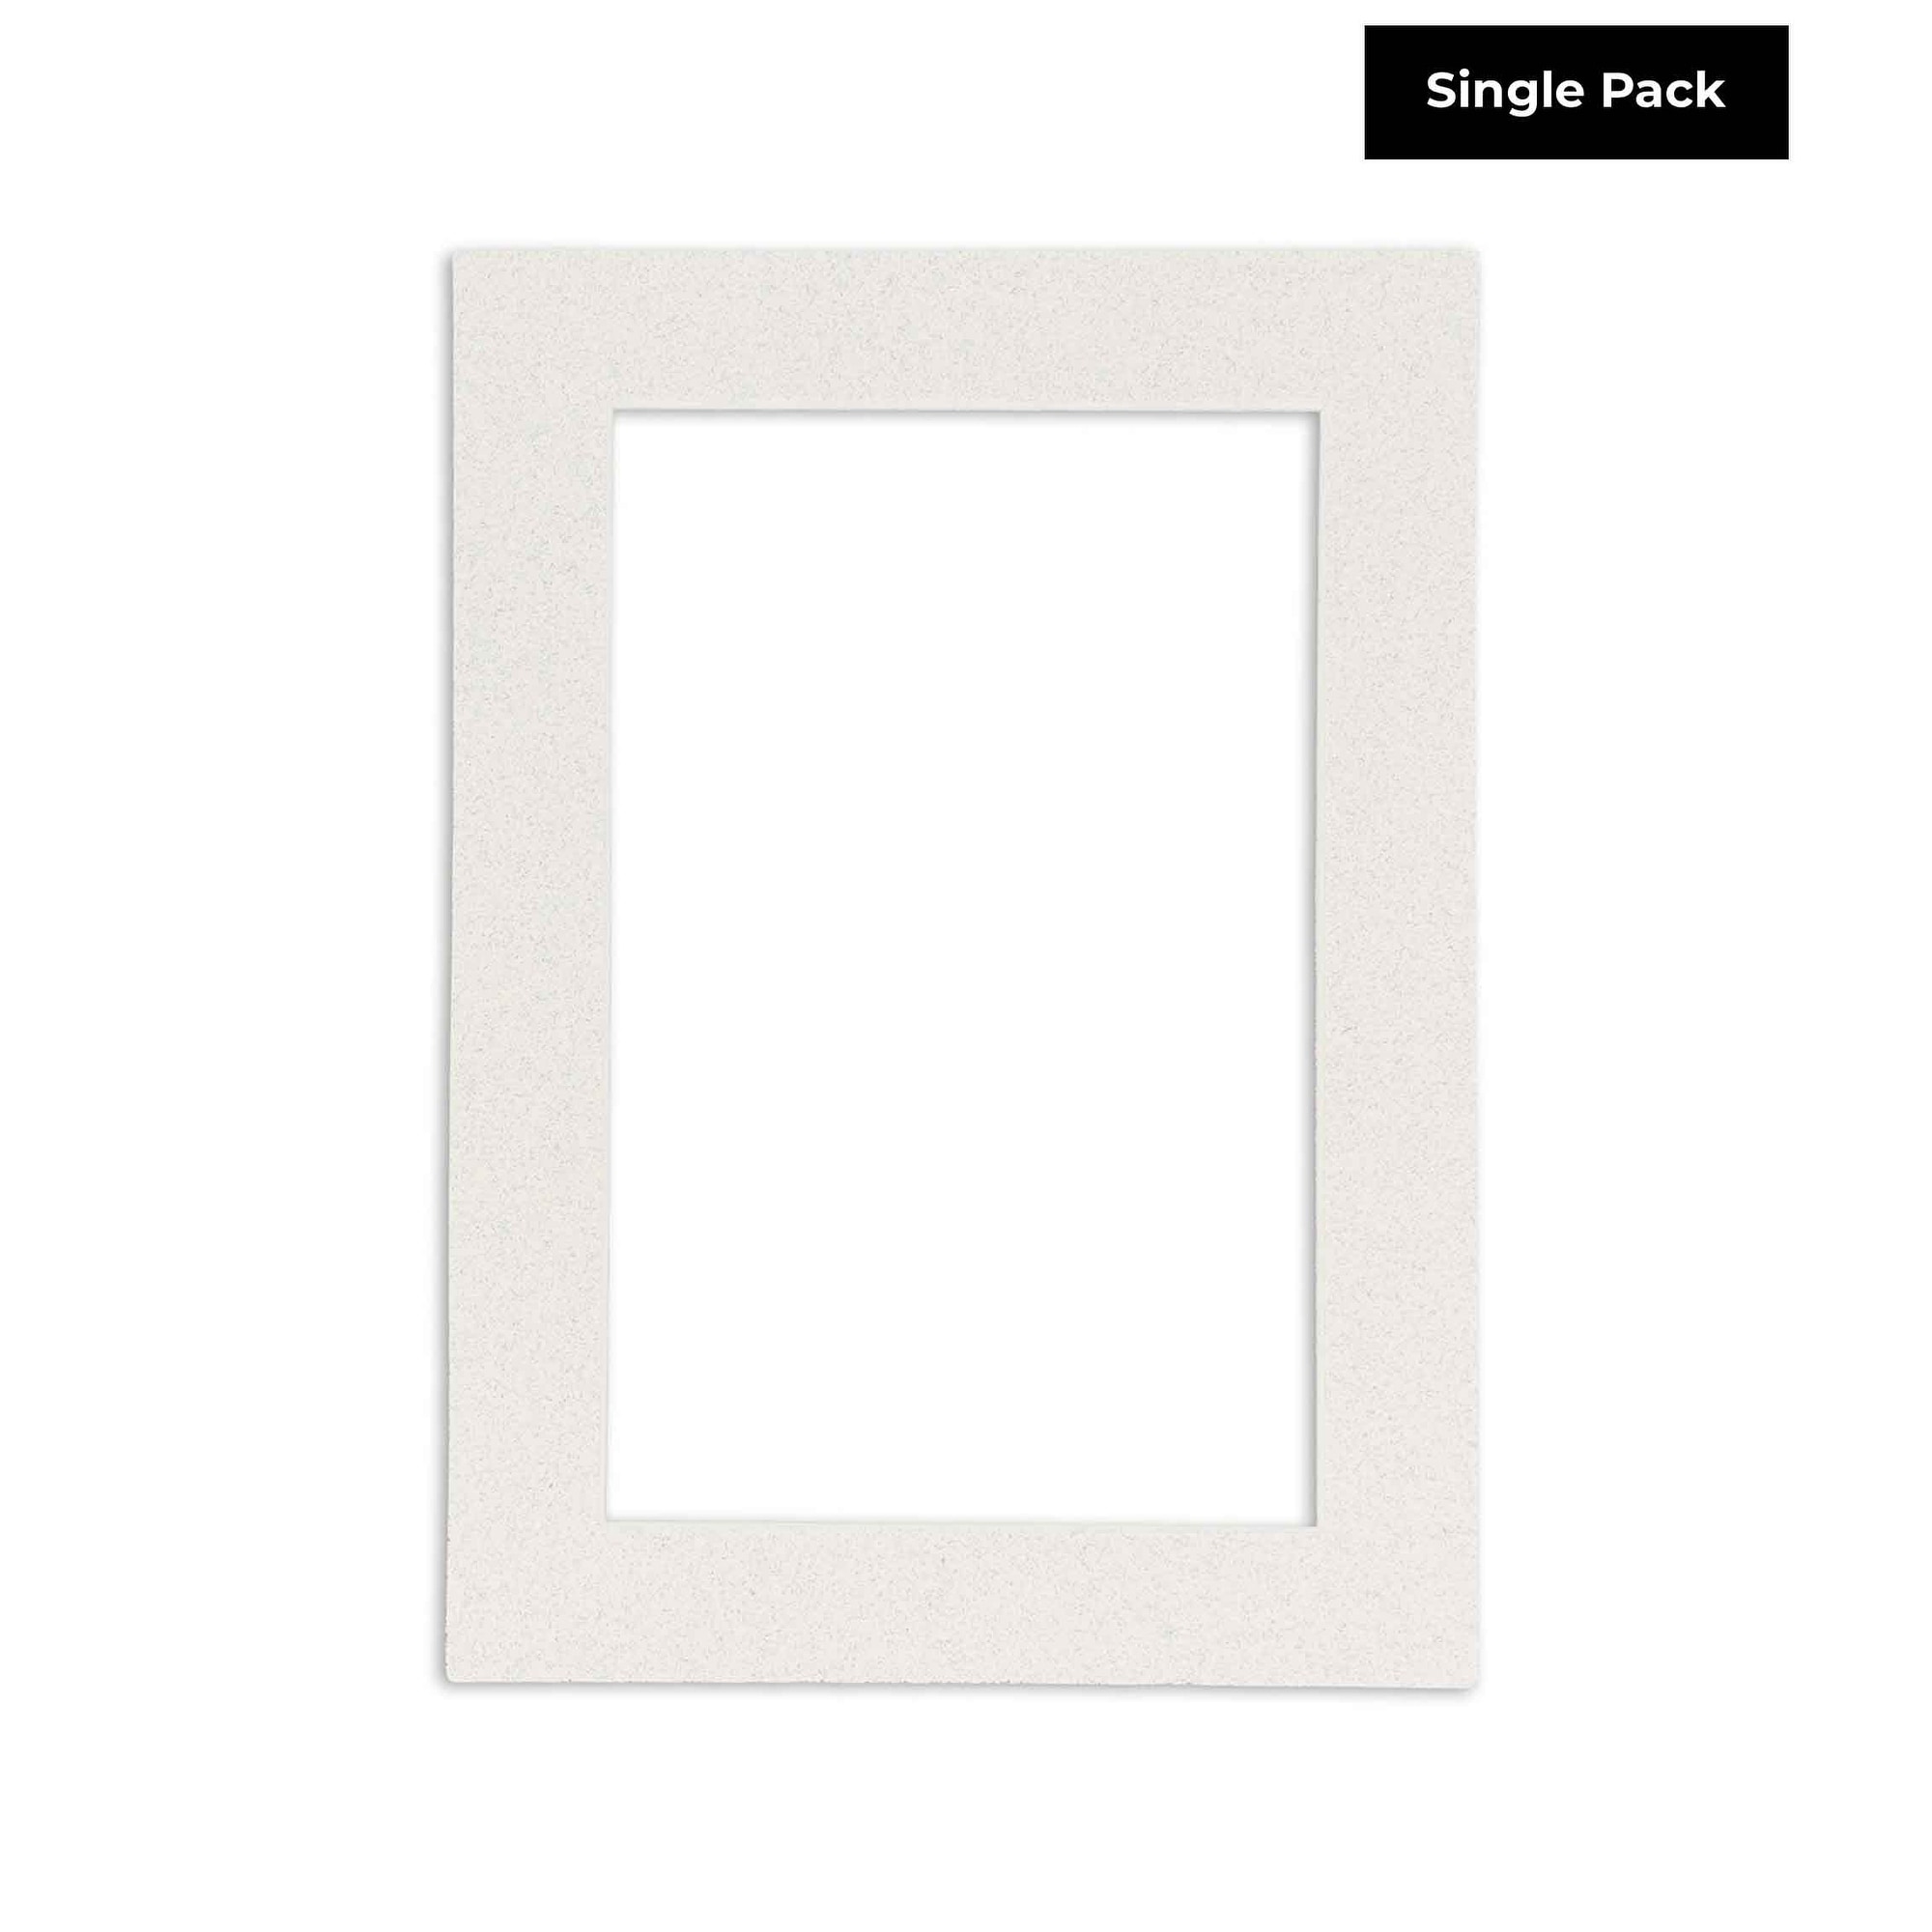 12x18 Mat Bevel Cut for 10x15 Photos - Acid Free Oyster Shell White Precut Matboard - for Pictures, Photos, Framing